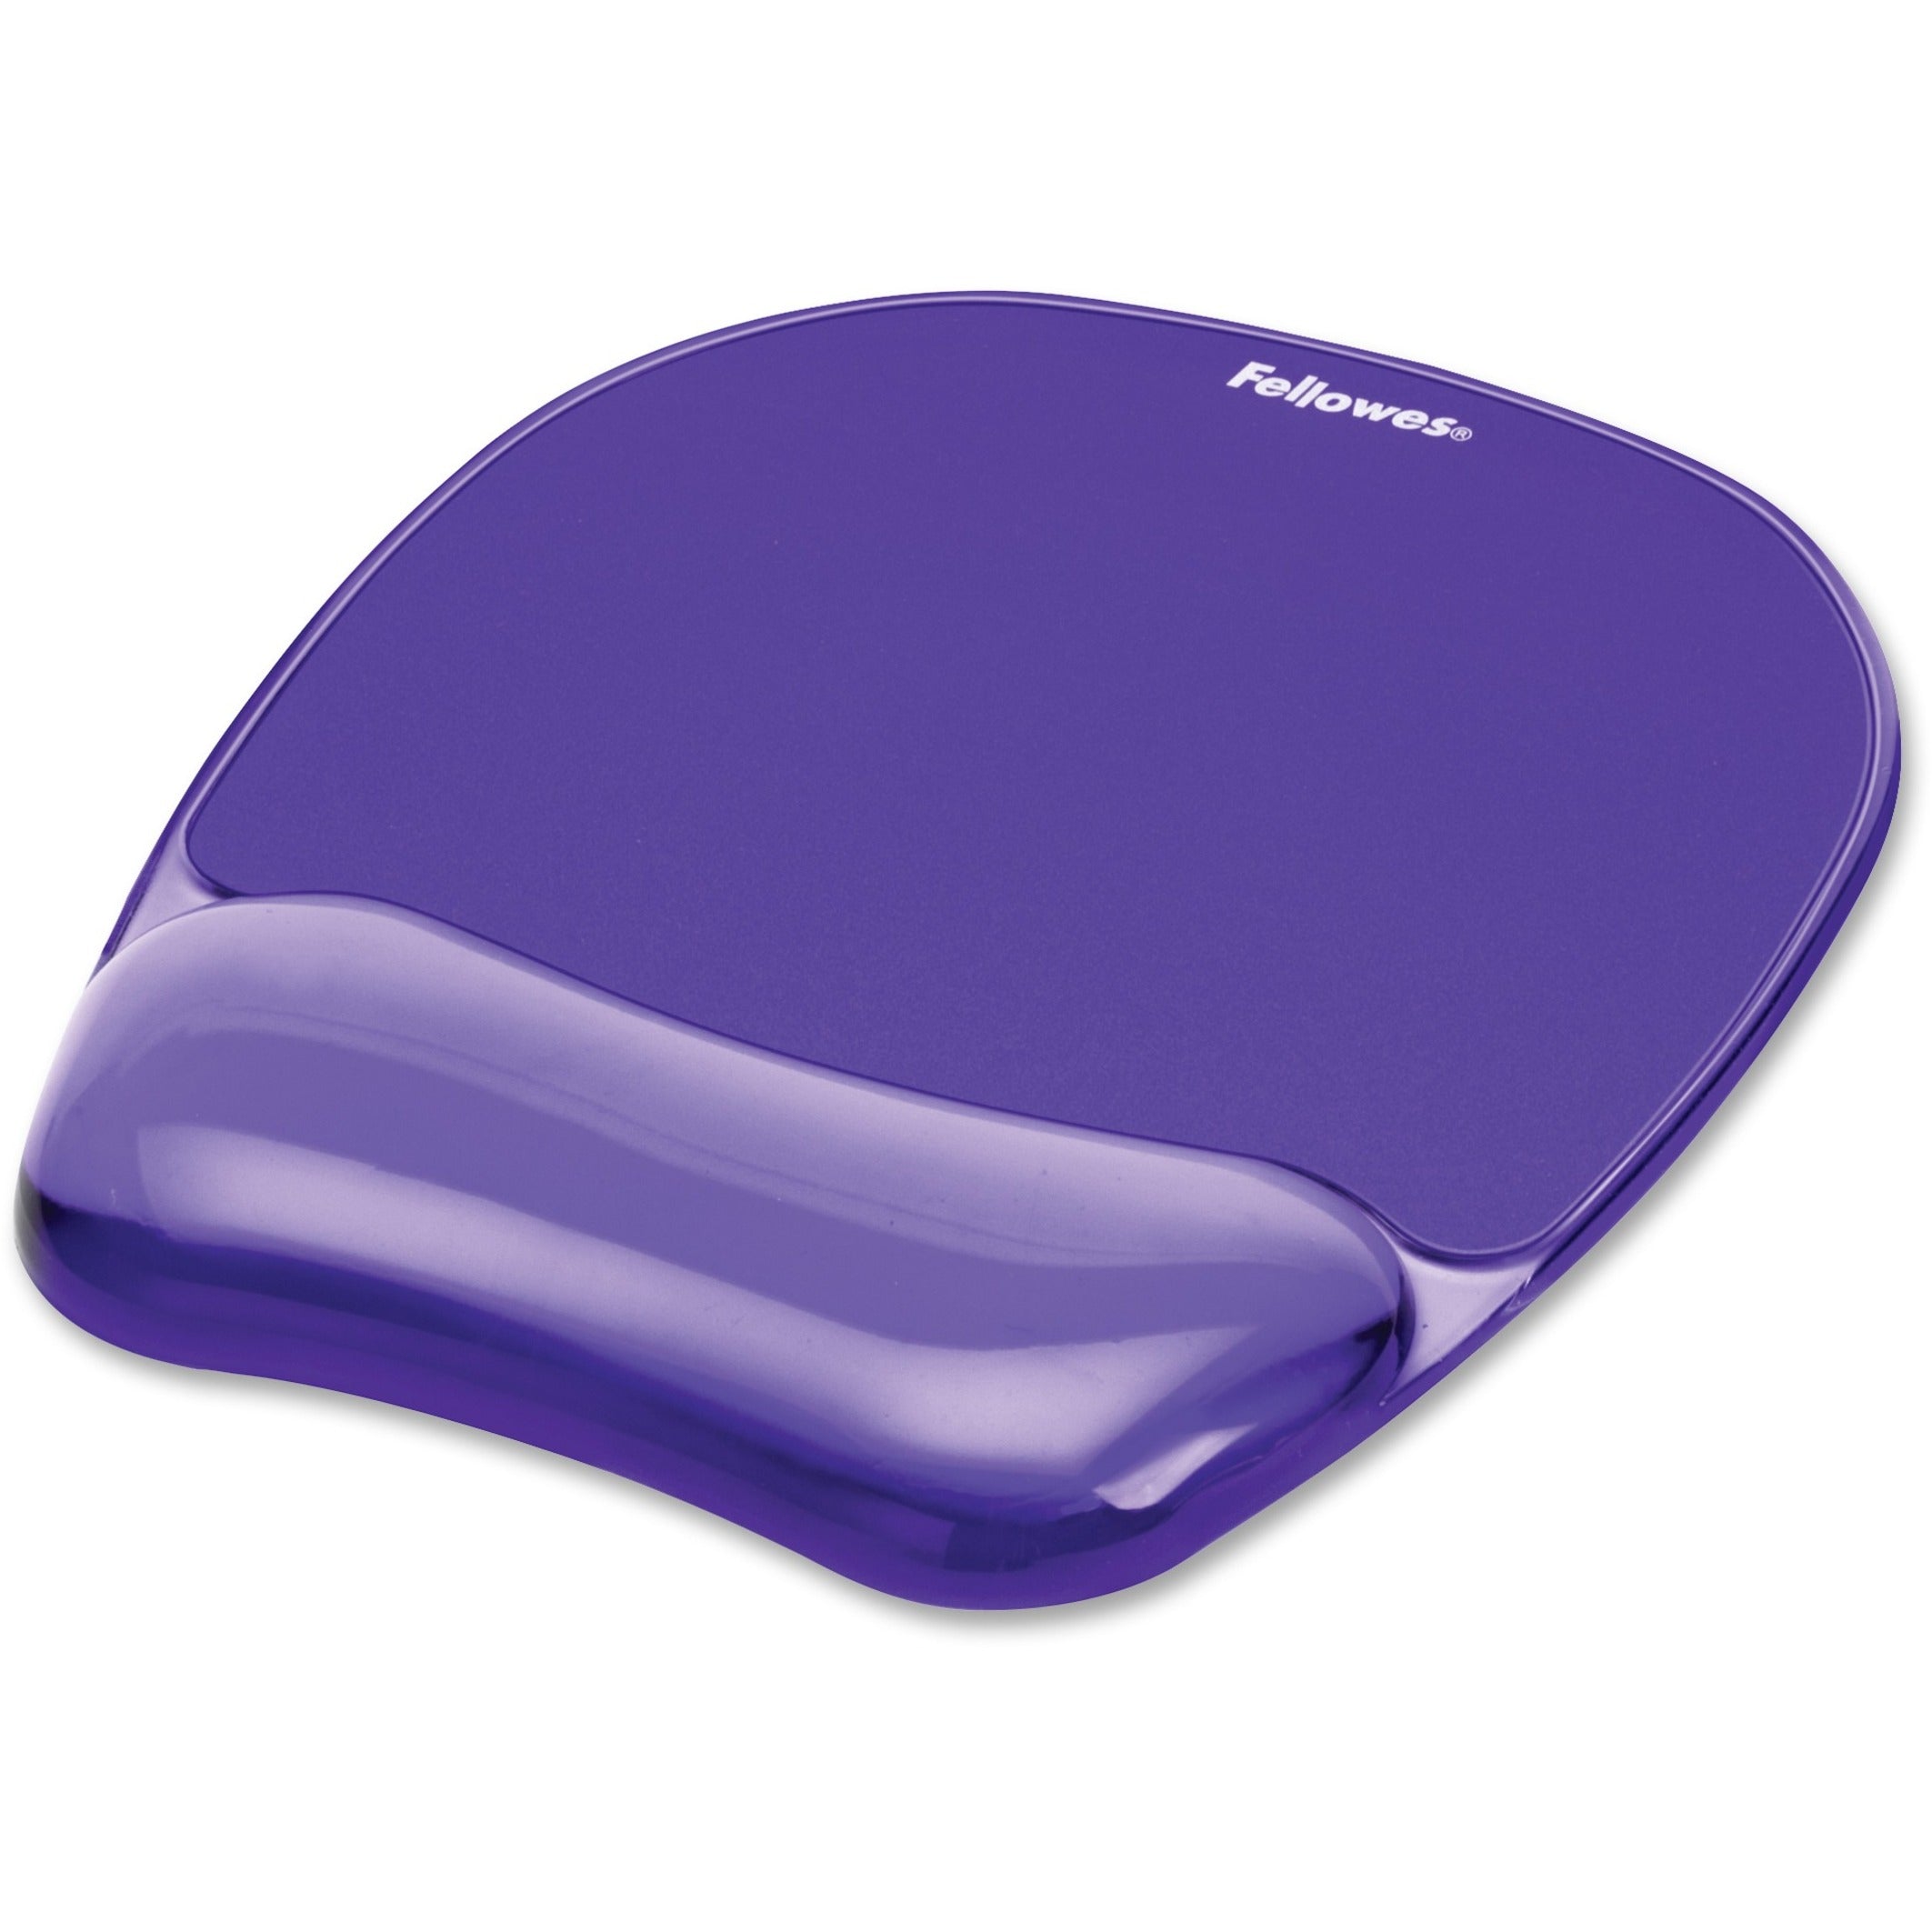 Fellowes 91441 Crystals Gel Mousepad/Wrist Rest, Non-skid Base, Pressure Reliever, Comfortable, Easy to Clean, Ergonomic